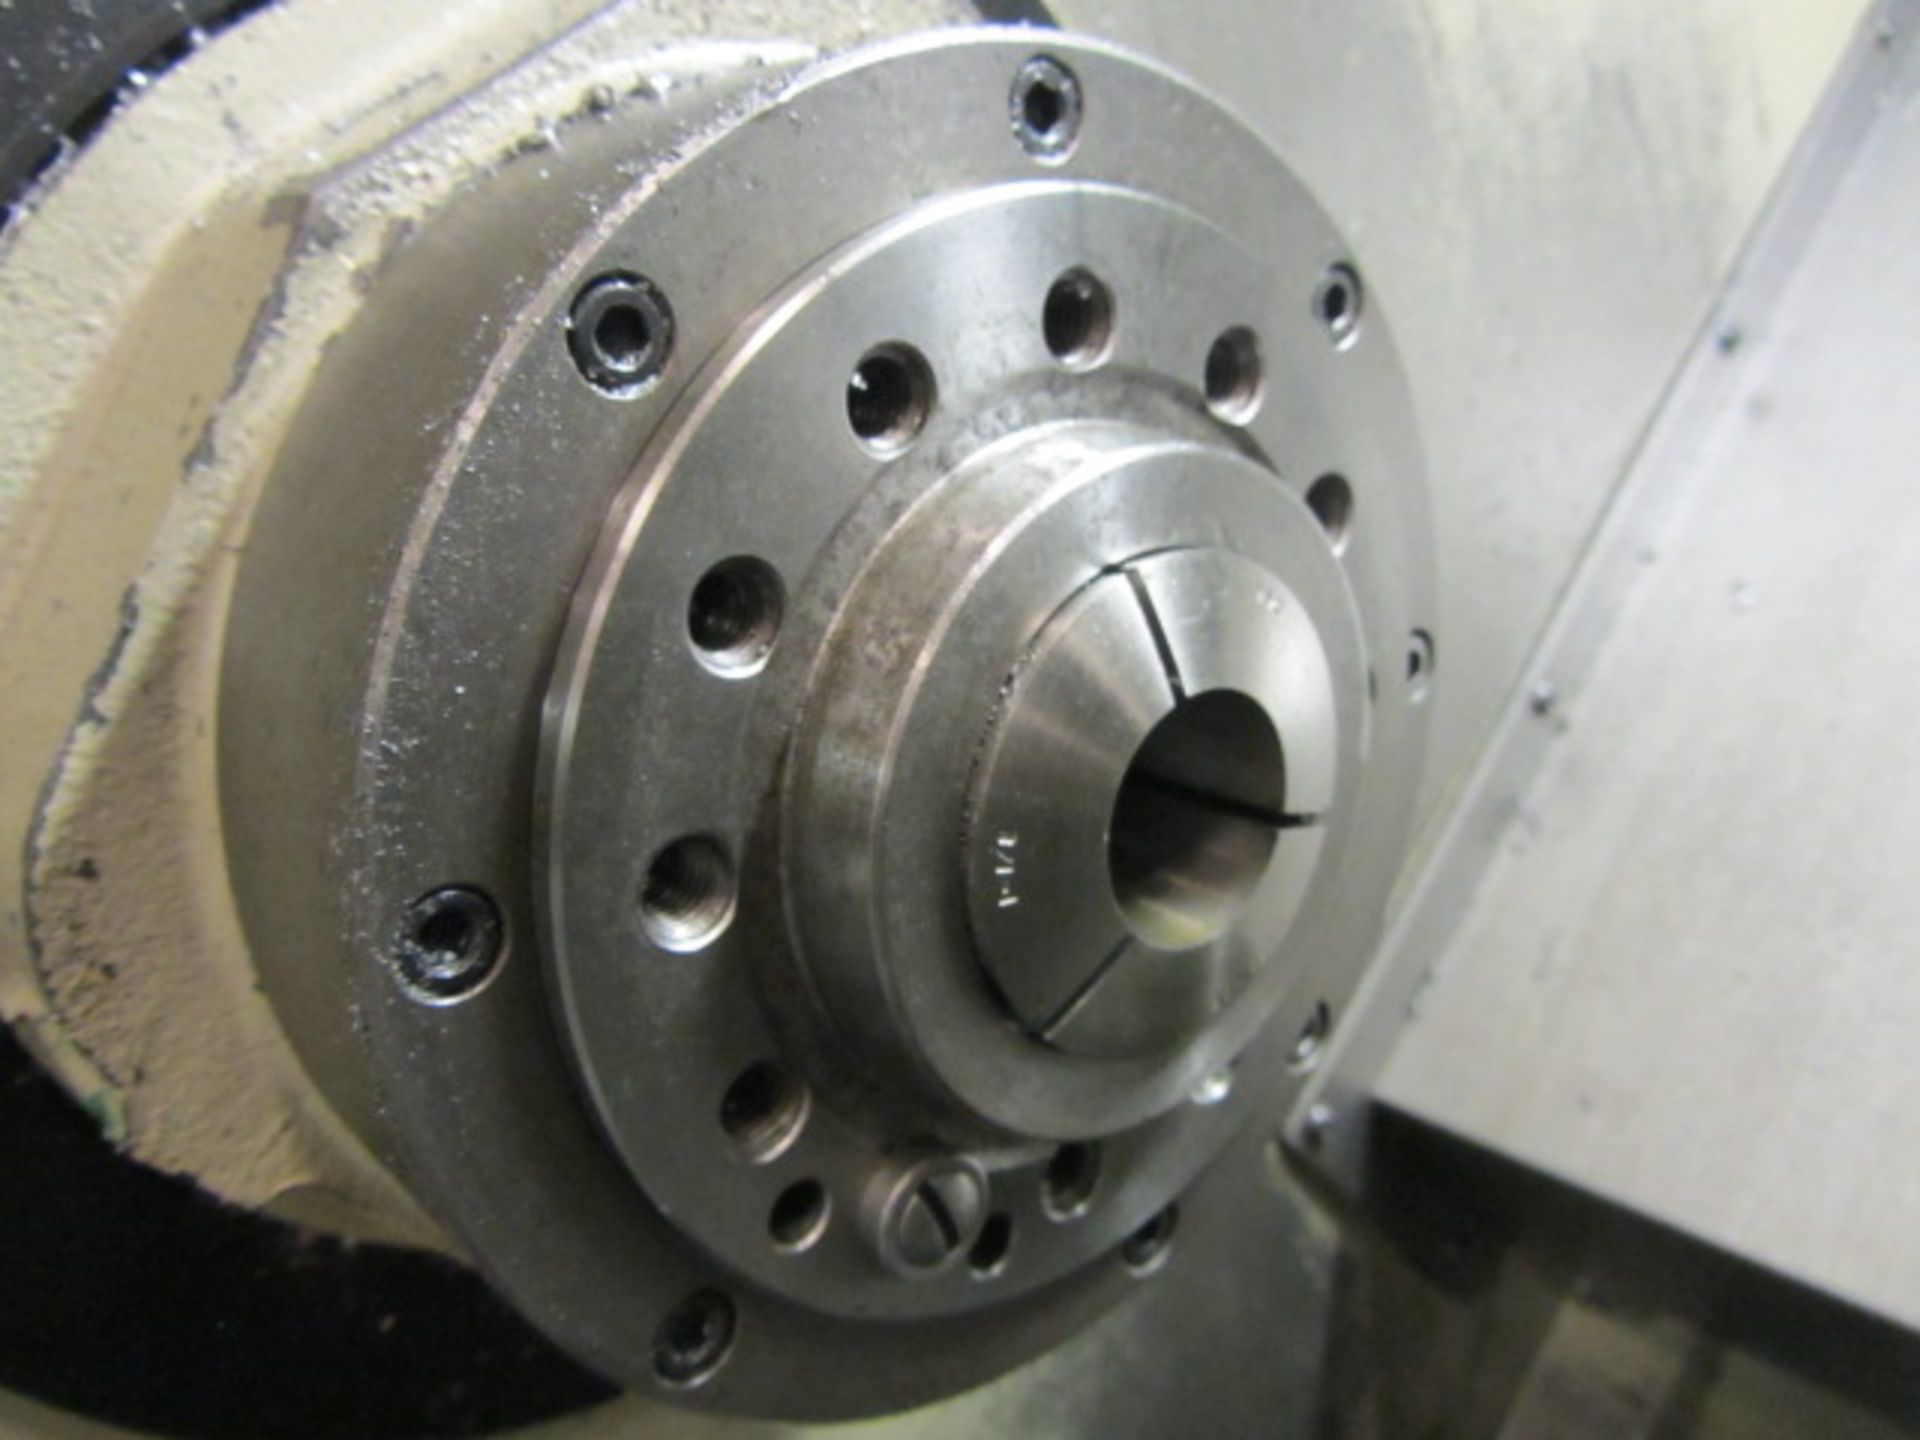 Hardinge Conquest T42 CNC Turning Center with 6'' Chuck, Collet Spindle Nose, Spindle Speeds to 5000 - Image 5 of 9